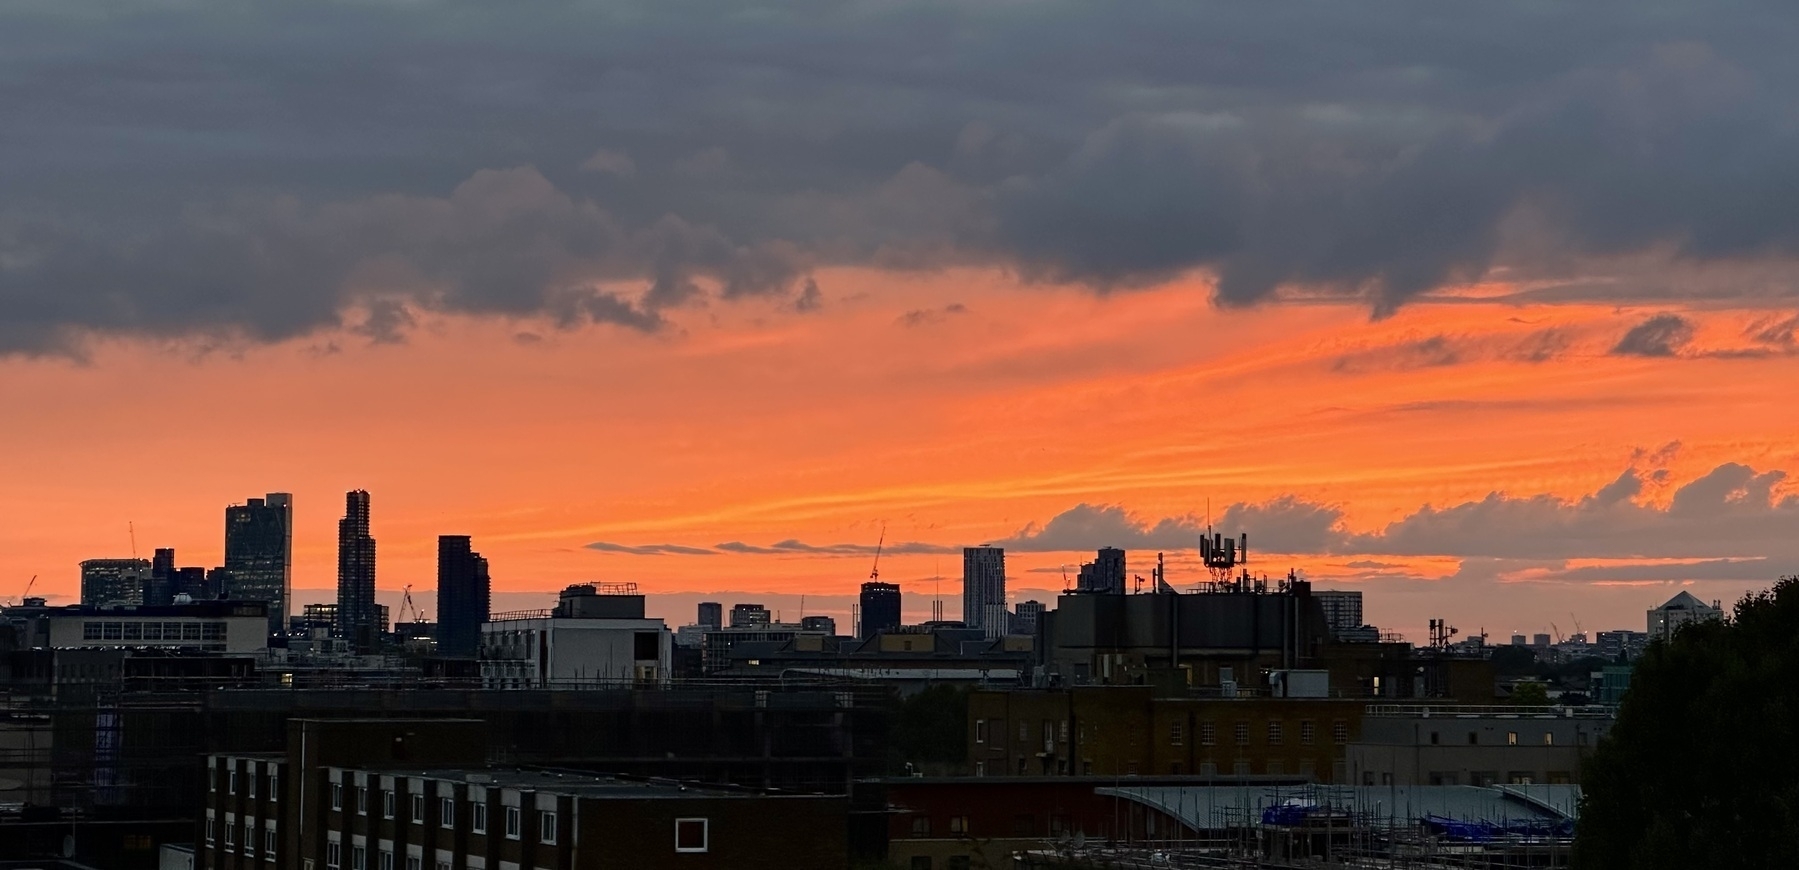 A band of orange sky at sunset, sandwiched between a building filled horizon below and grey clouds above.